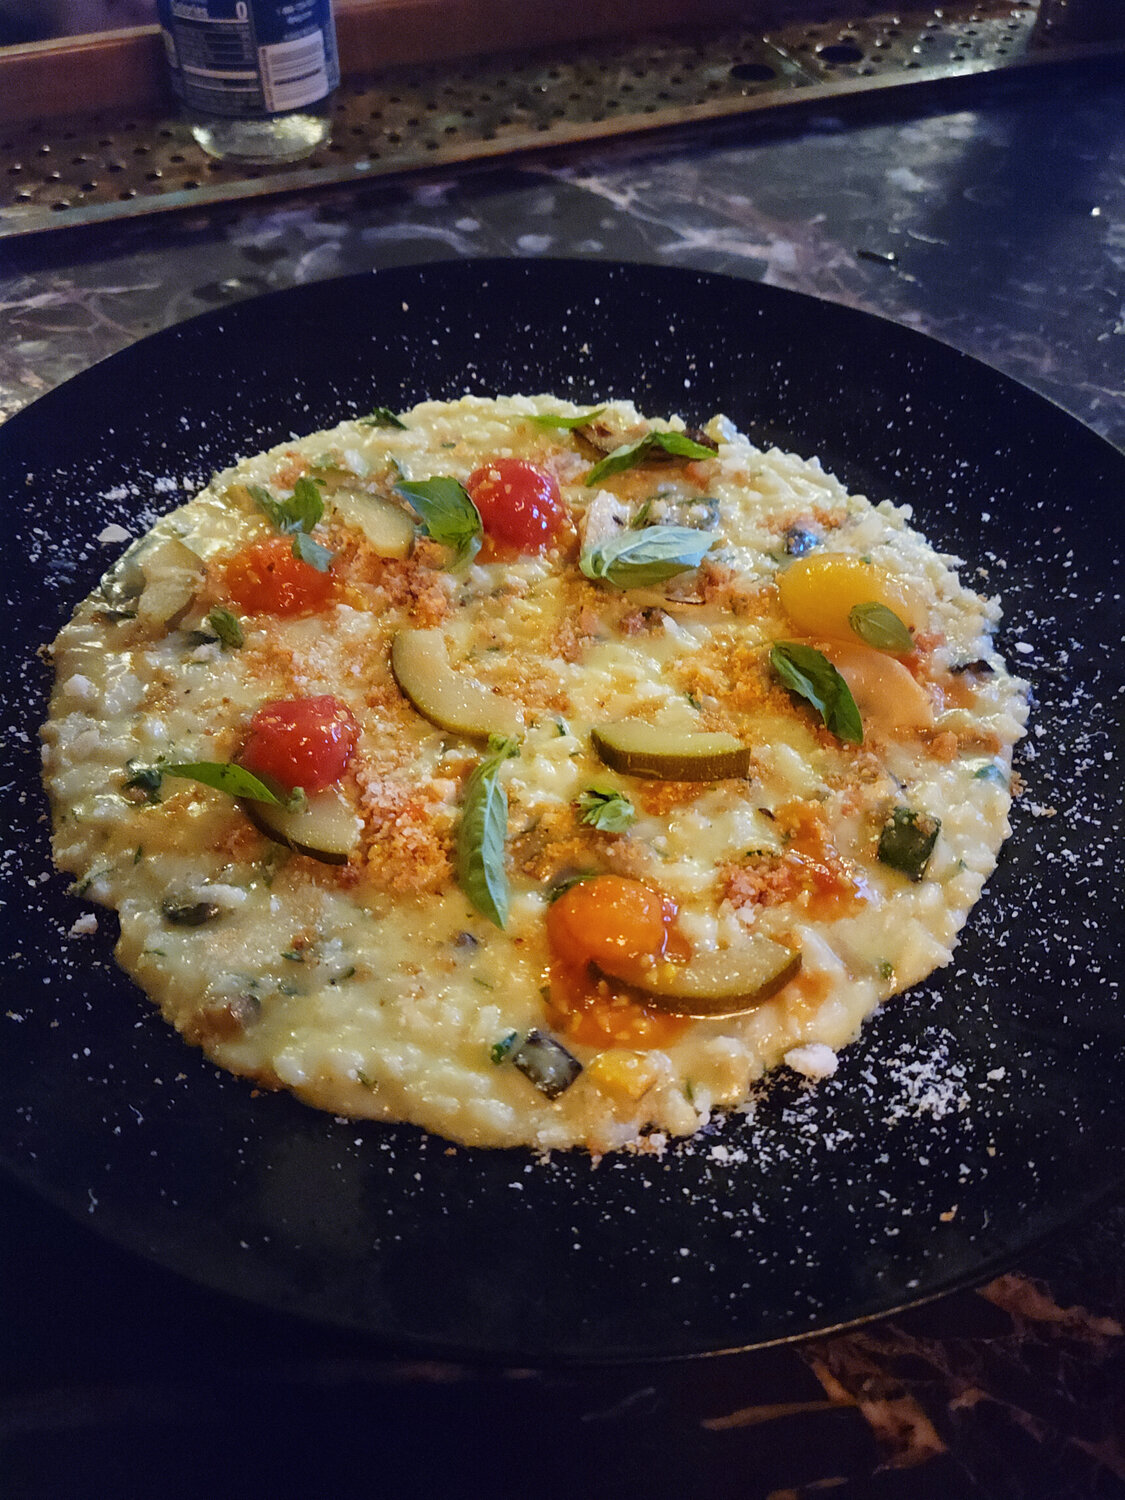 The Vegetable Risotto is made with sautéed zucchini and summer squash, tomatoes and zucchini escabeche, zucchini marinated in vinegar and spices.